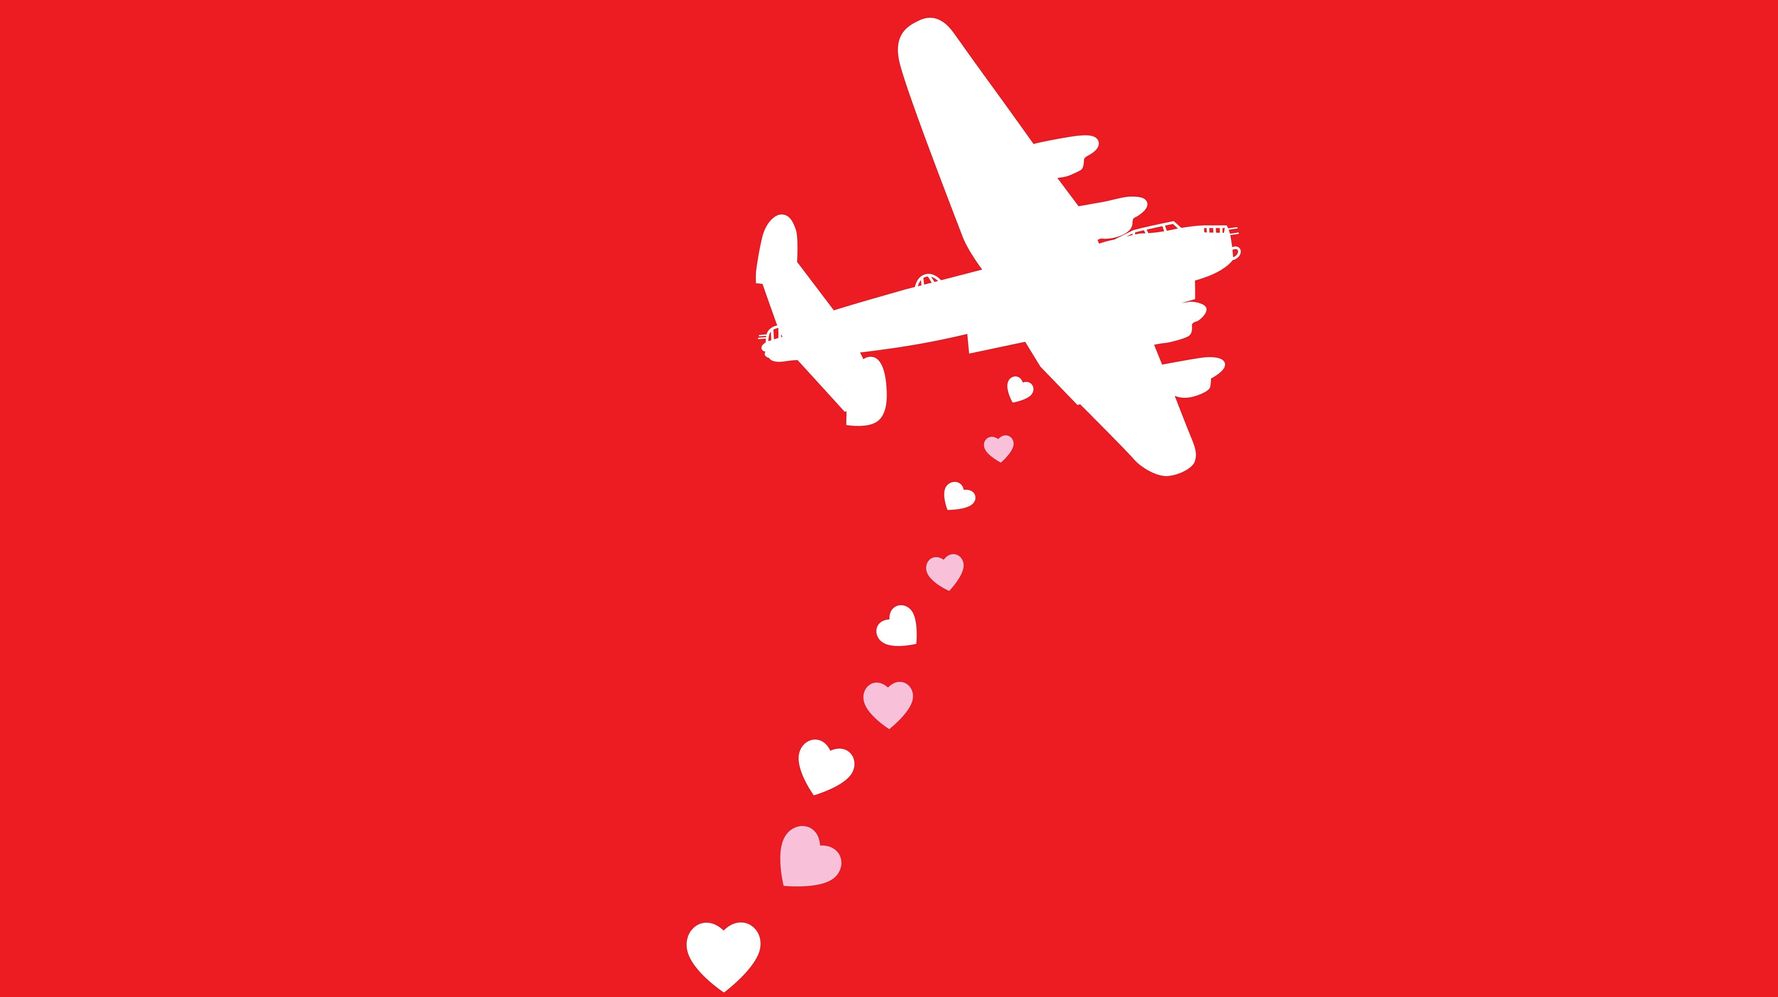 There's Nothing Romantic About Love Bombing | HuffPost Life